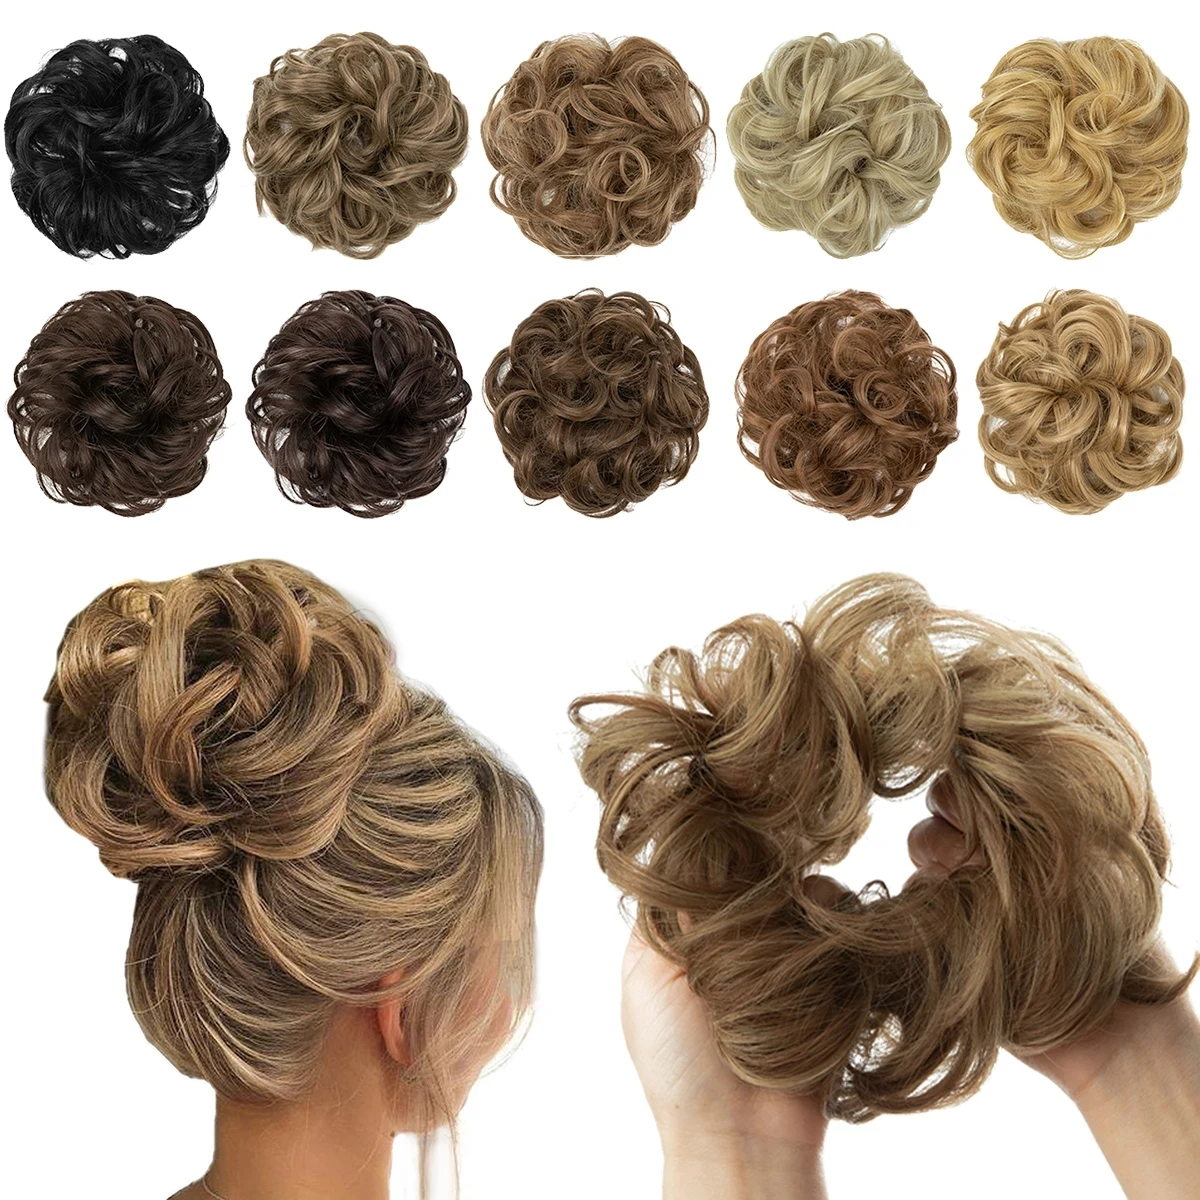 Hair Bun Extensions Messy Curly Elastic Hair Scrunchies Hairpieces Synthetic Chignon Donut Updo Hair Pieces for Women Girls